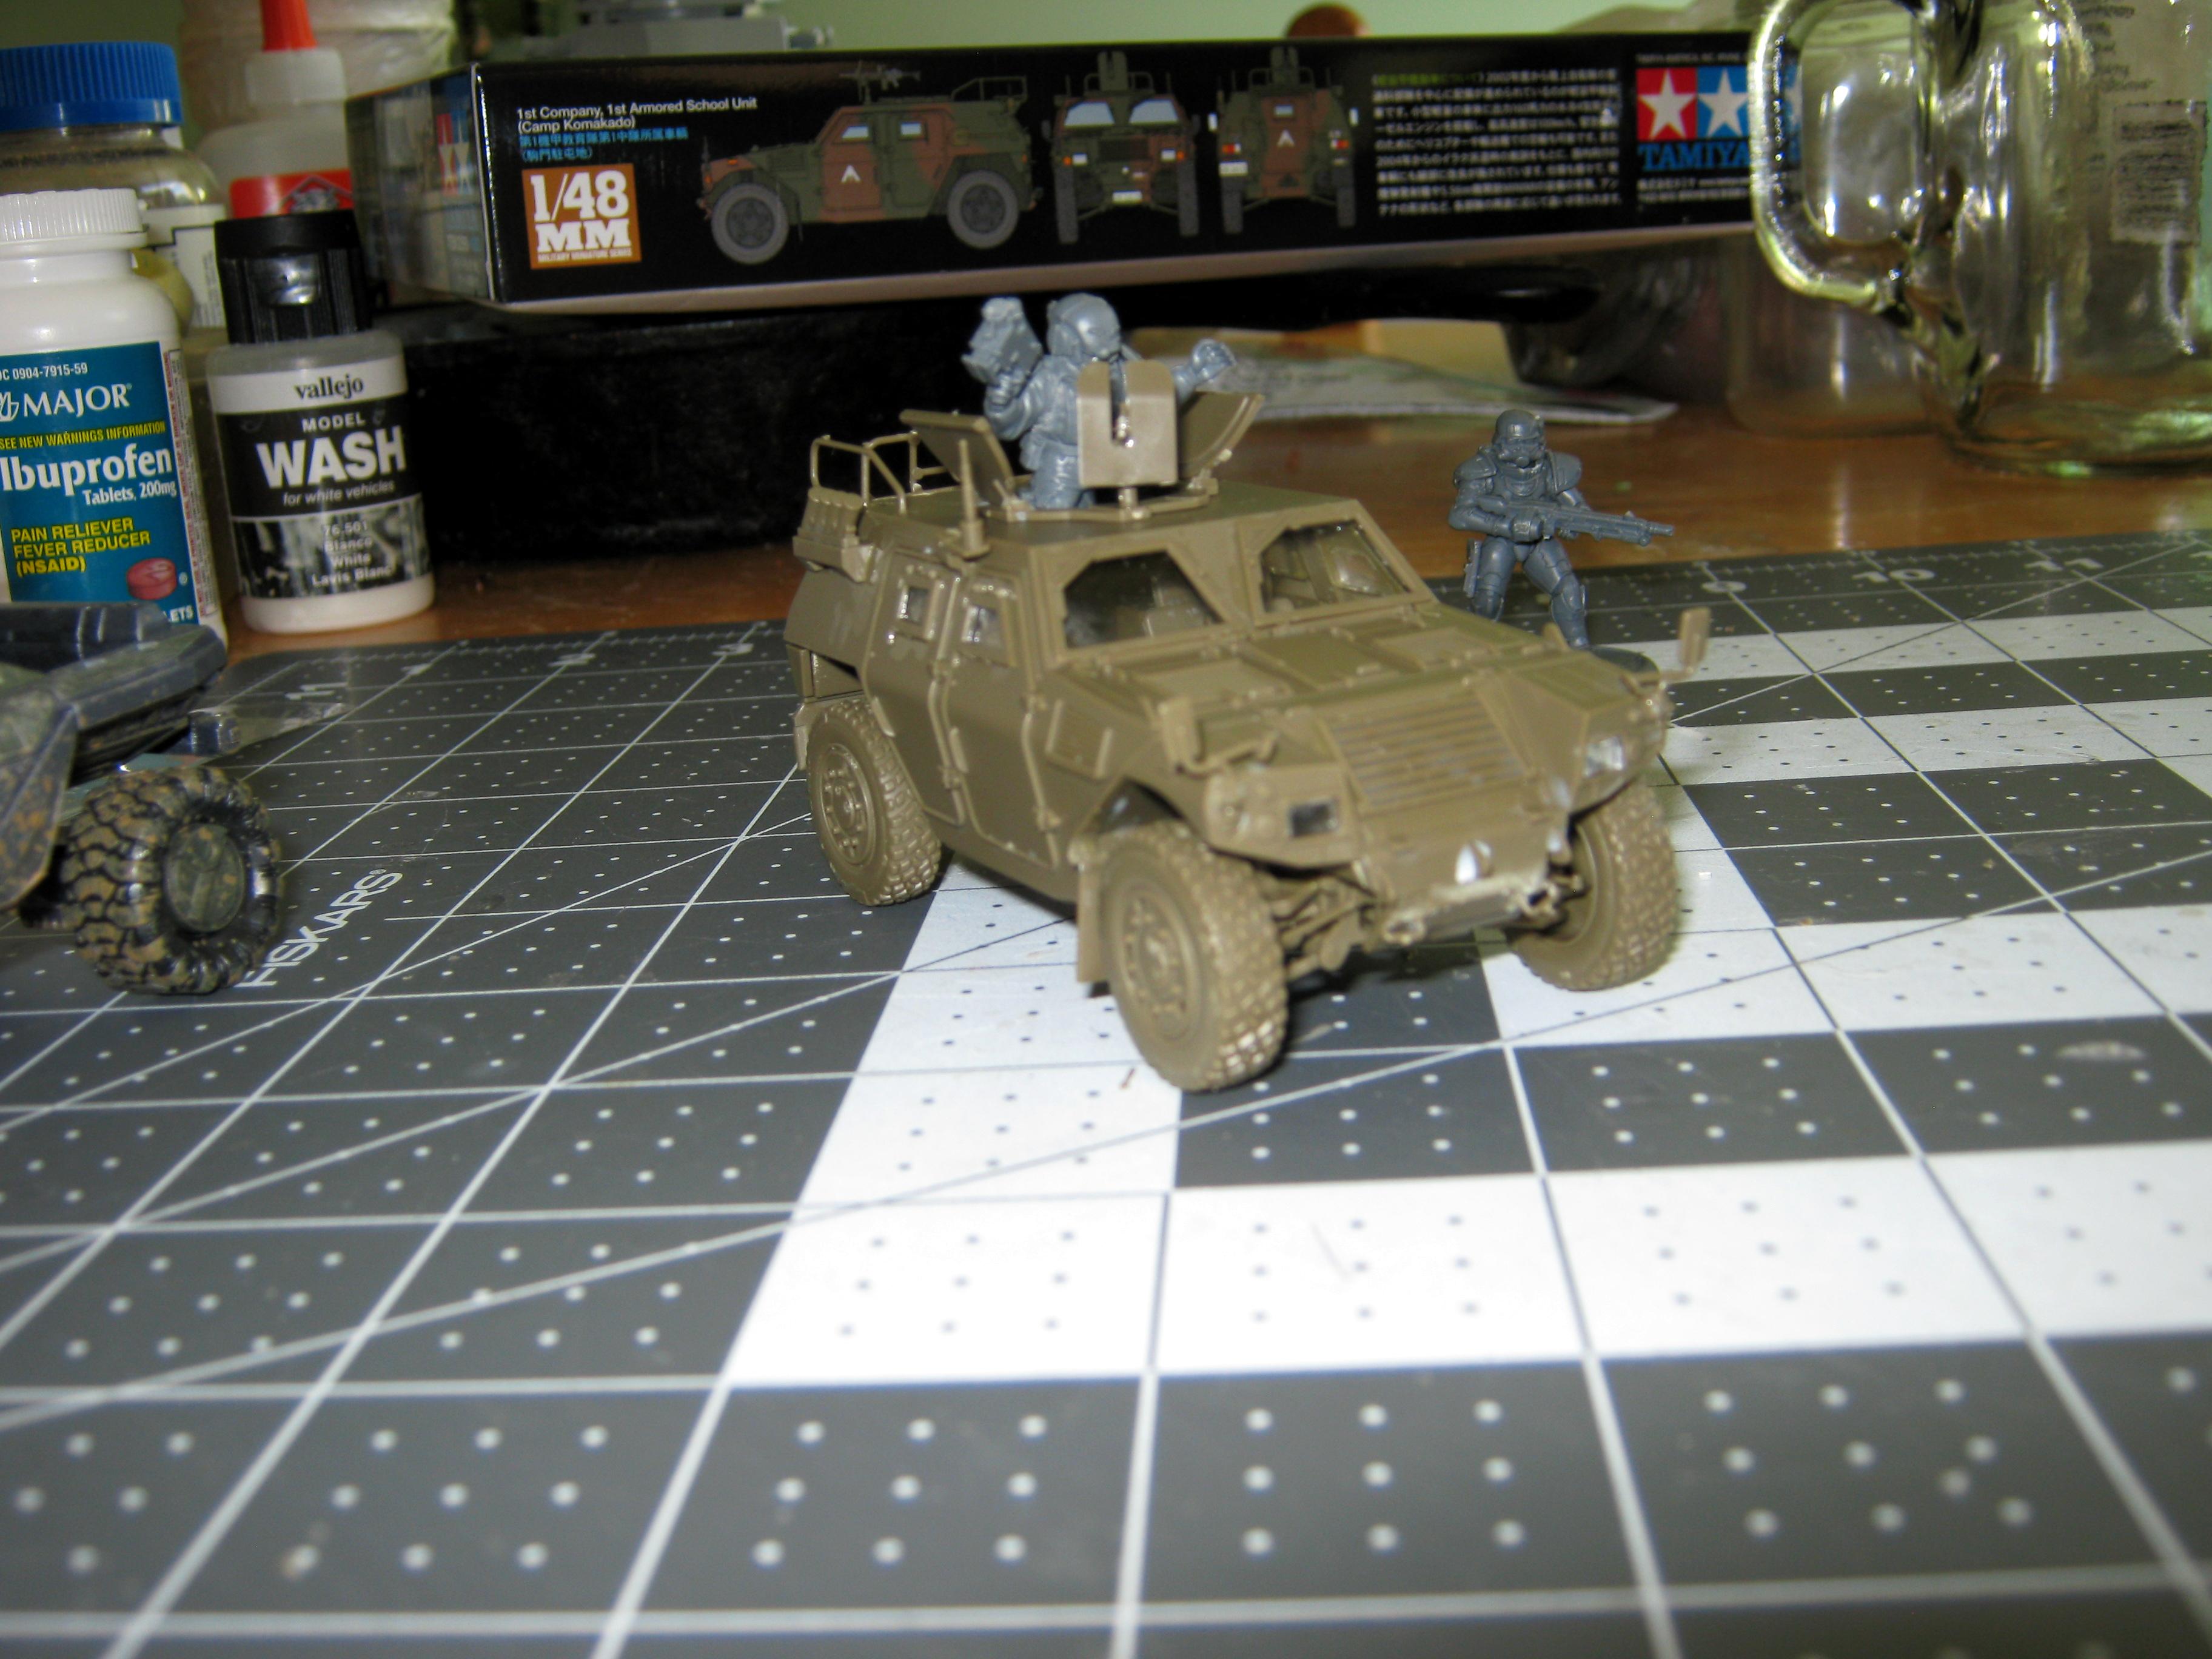 Armored Car, Conversion, Counts As, High Mobility Vehicle, Ifv, Imperial, Japanese, Jeep, Komatsu, Lav, Light Armored Vehicle, Tamiya